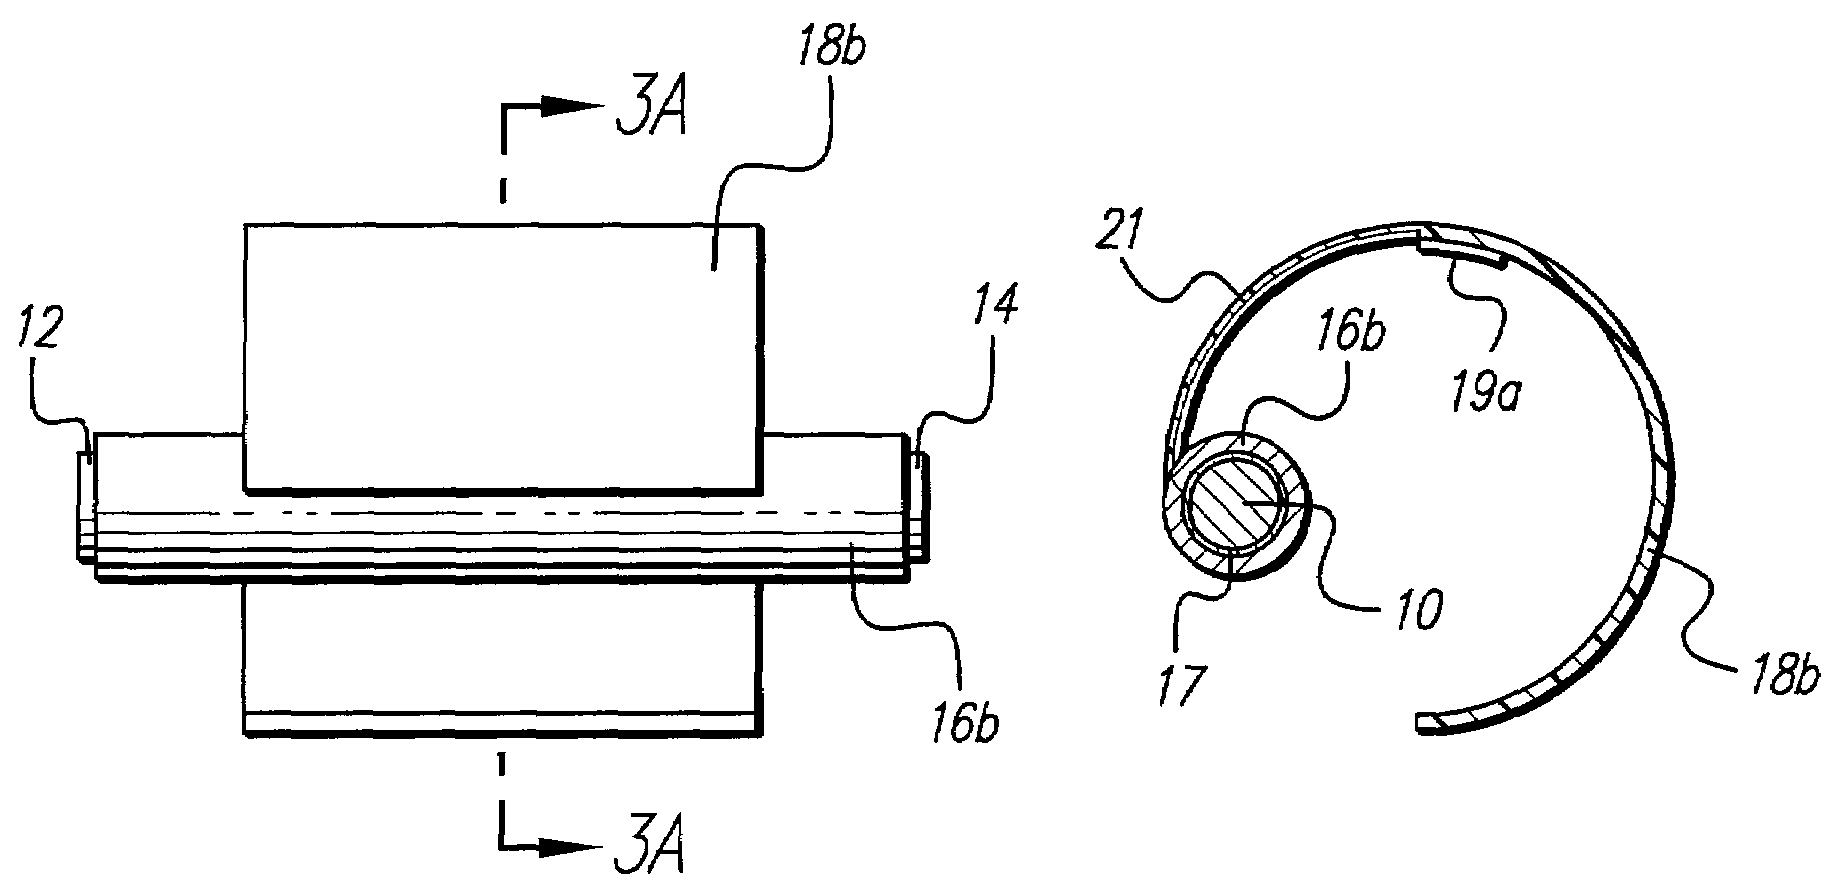 Fixation device for implantable microdevices